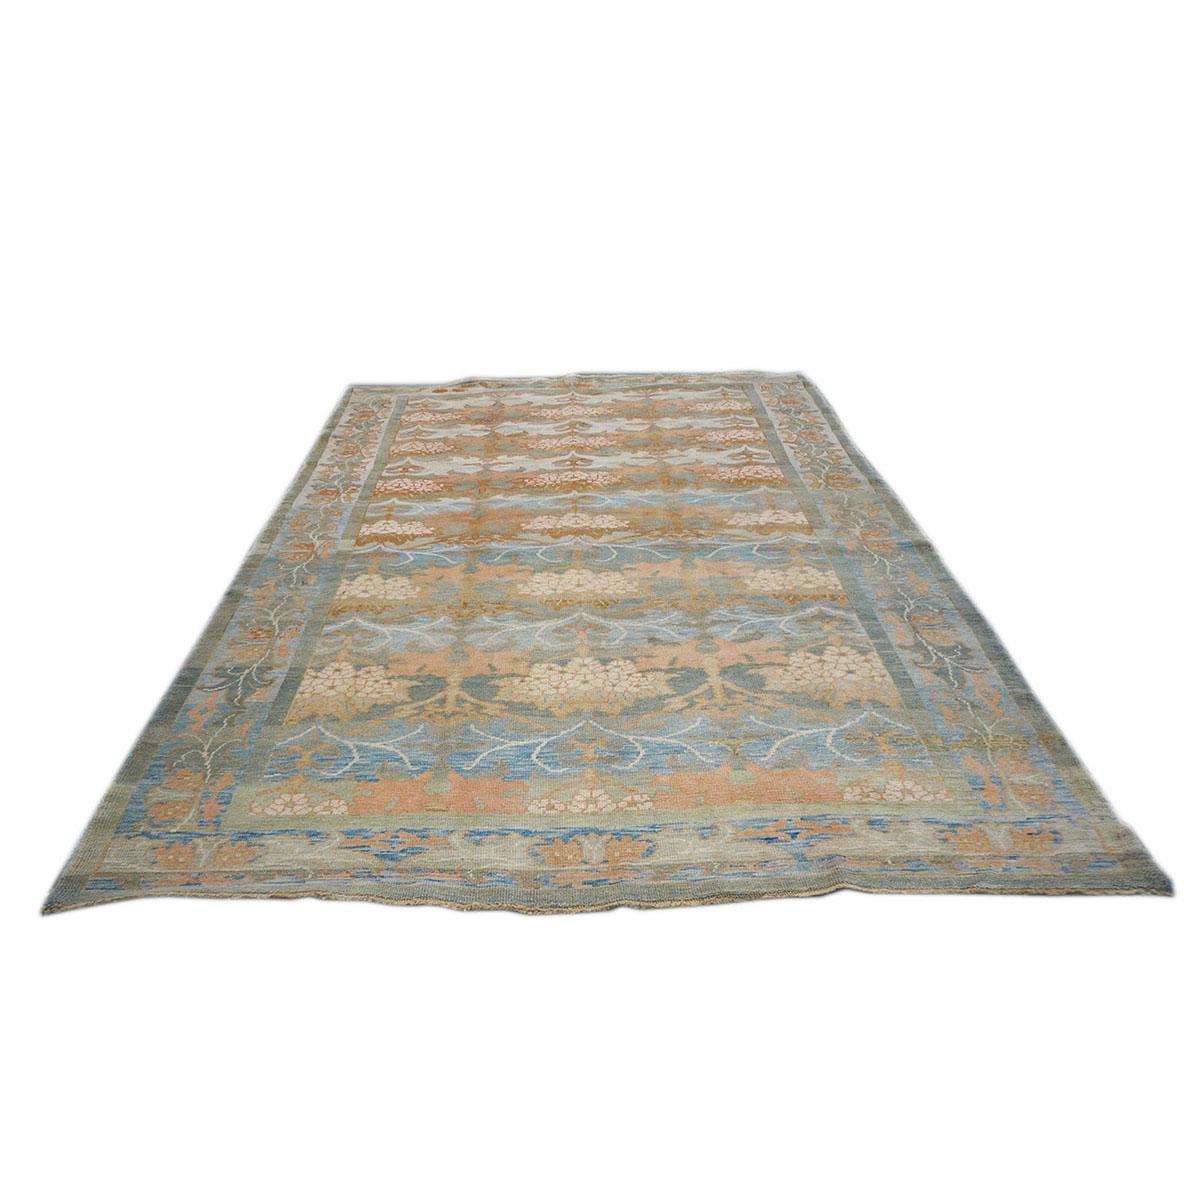 Donegal inspired oriental rug handwoven on our looms Exclusive Ashly Master Donegal production of 100% hand-spun vegetable-dyed wool. This rug is made with the exact methods from which they were made in the 1800s, it has a 1/4 inch thick pile. This